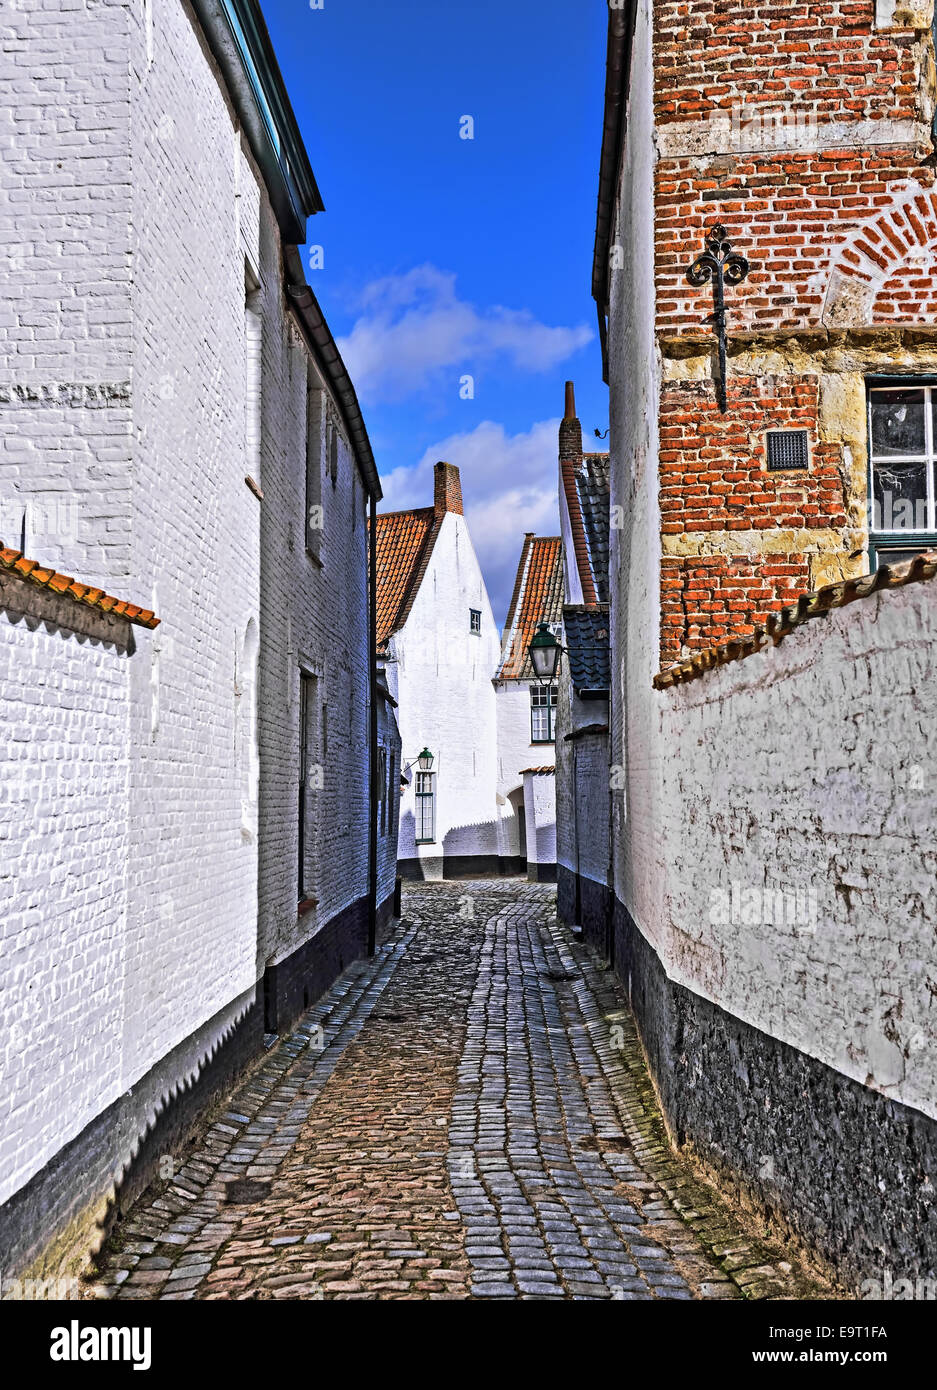 Medieval street in historical center of Courtrai, Belgium Stock Photo